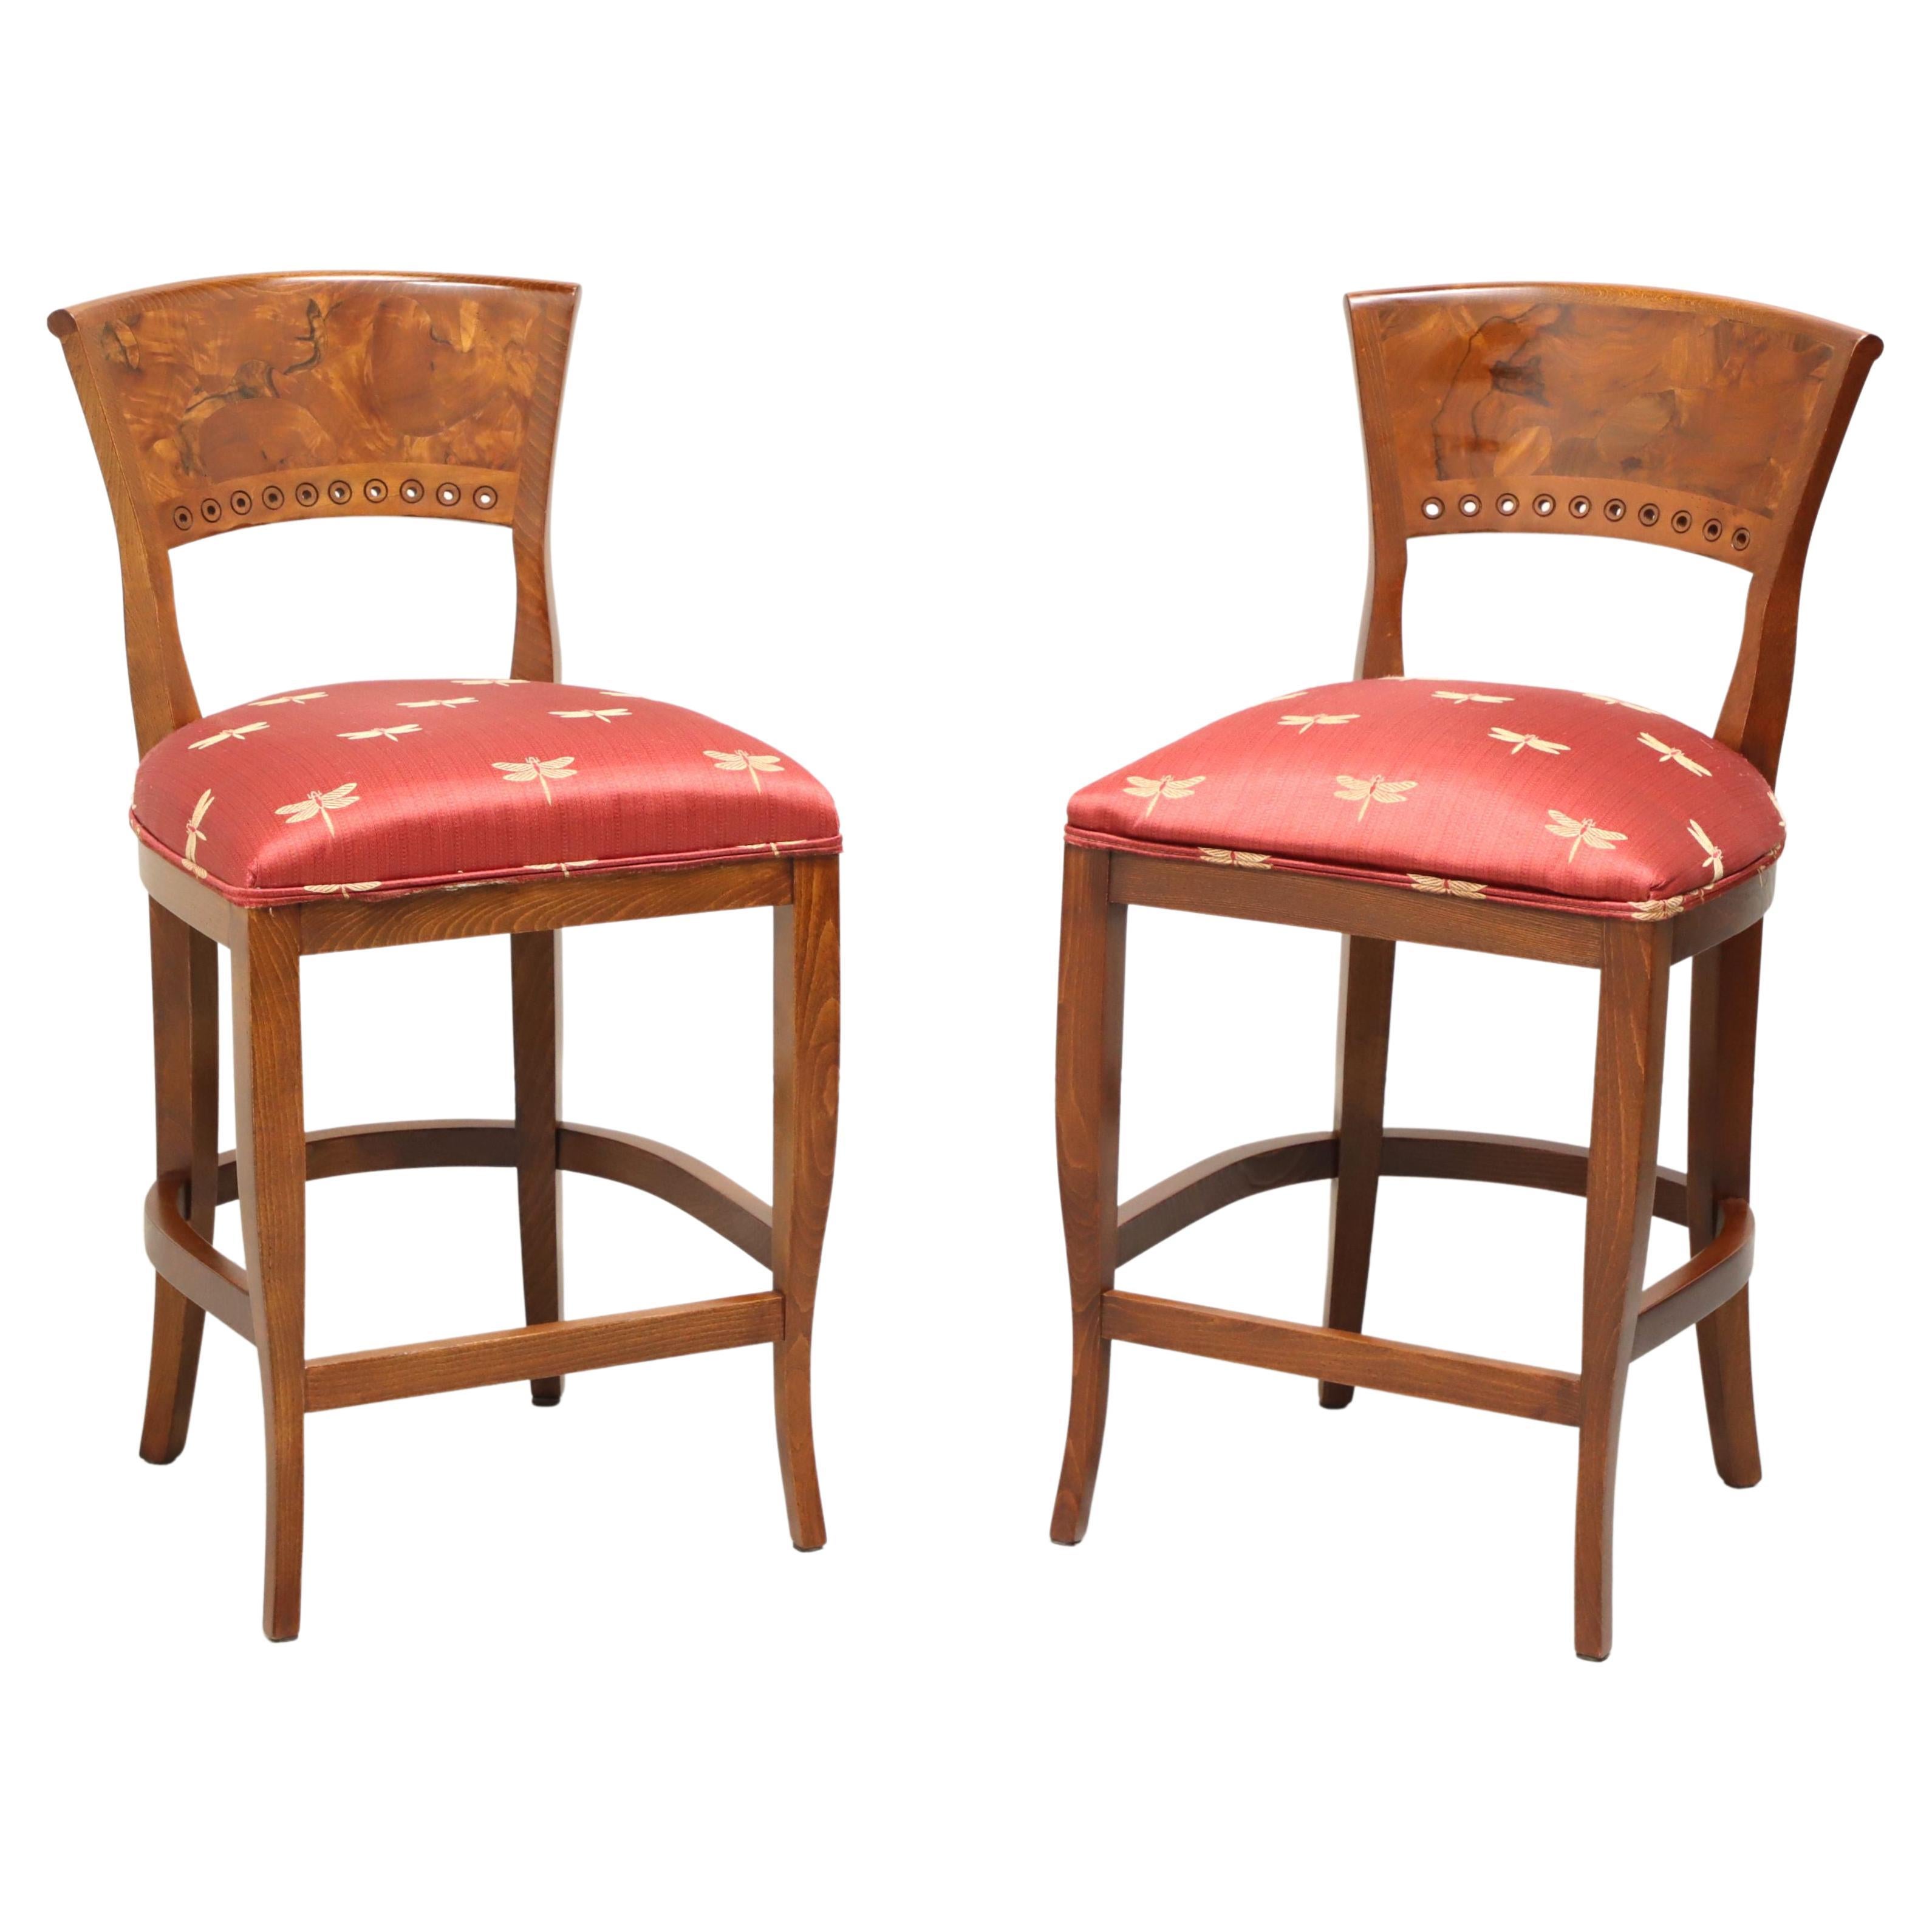 Tiger & Burl Oak Counter Height Stools by EMERSON ET CIE - Pair B